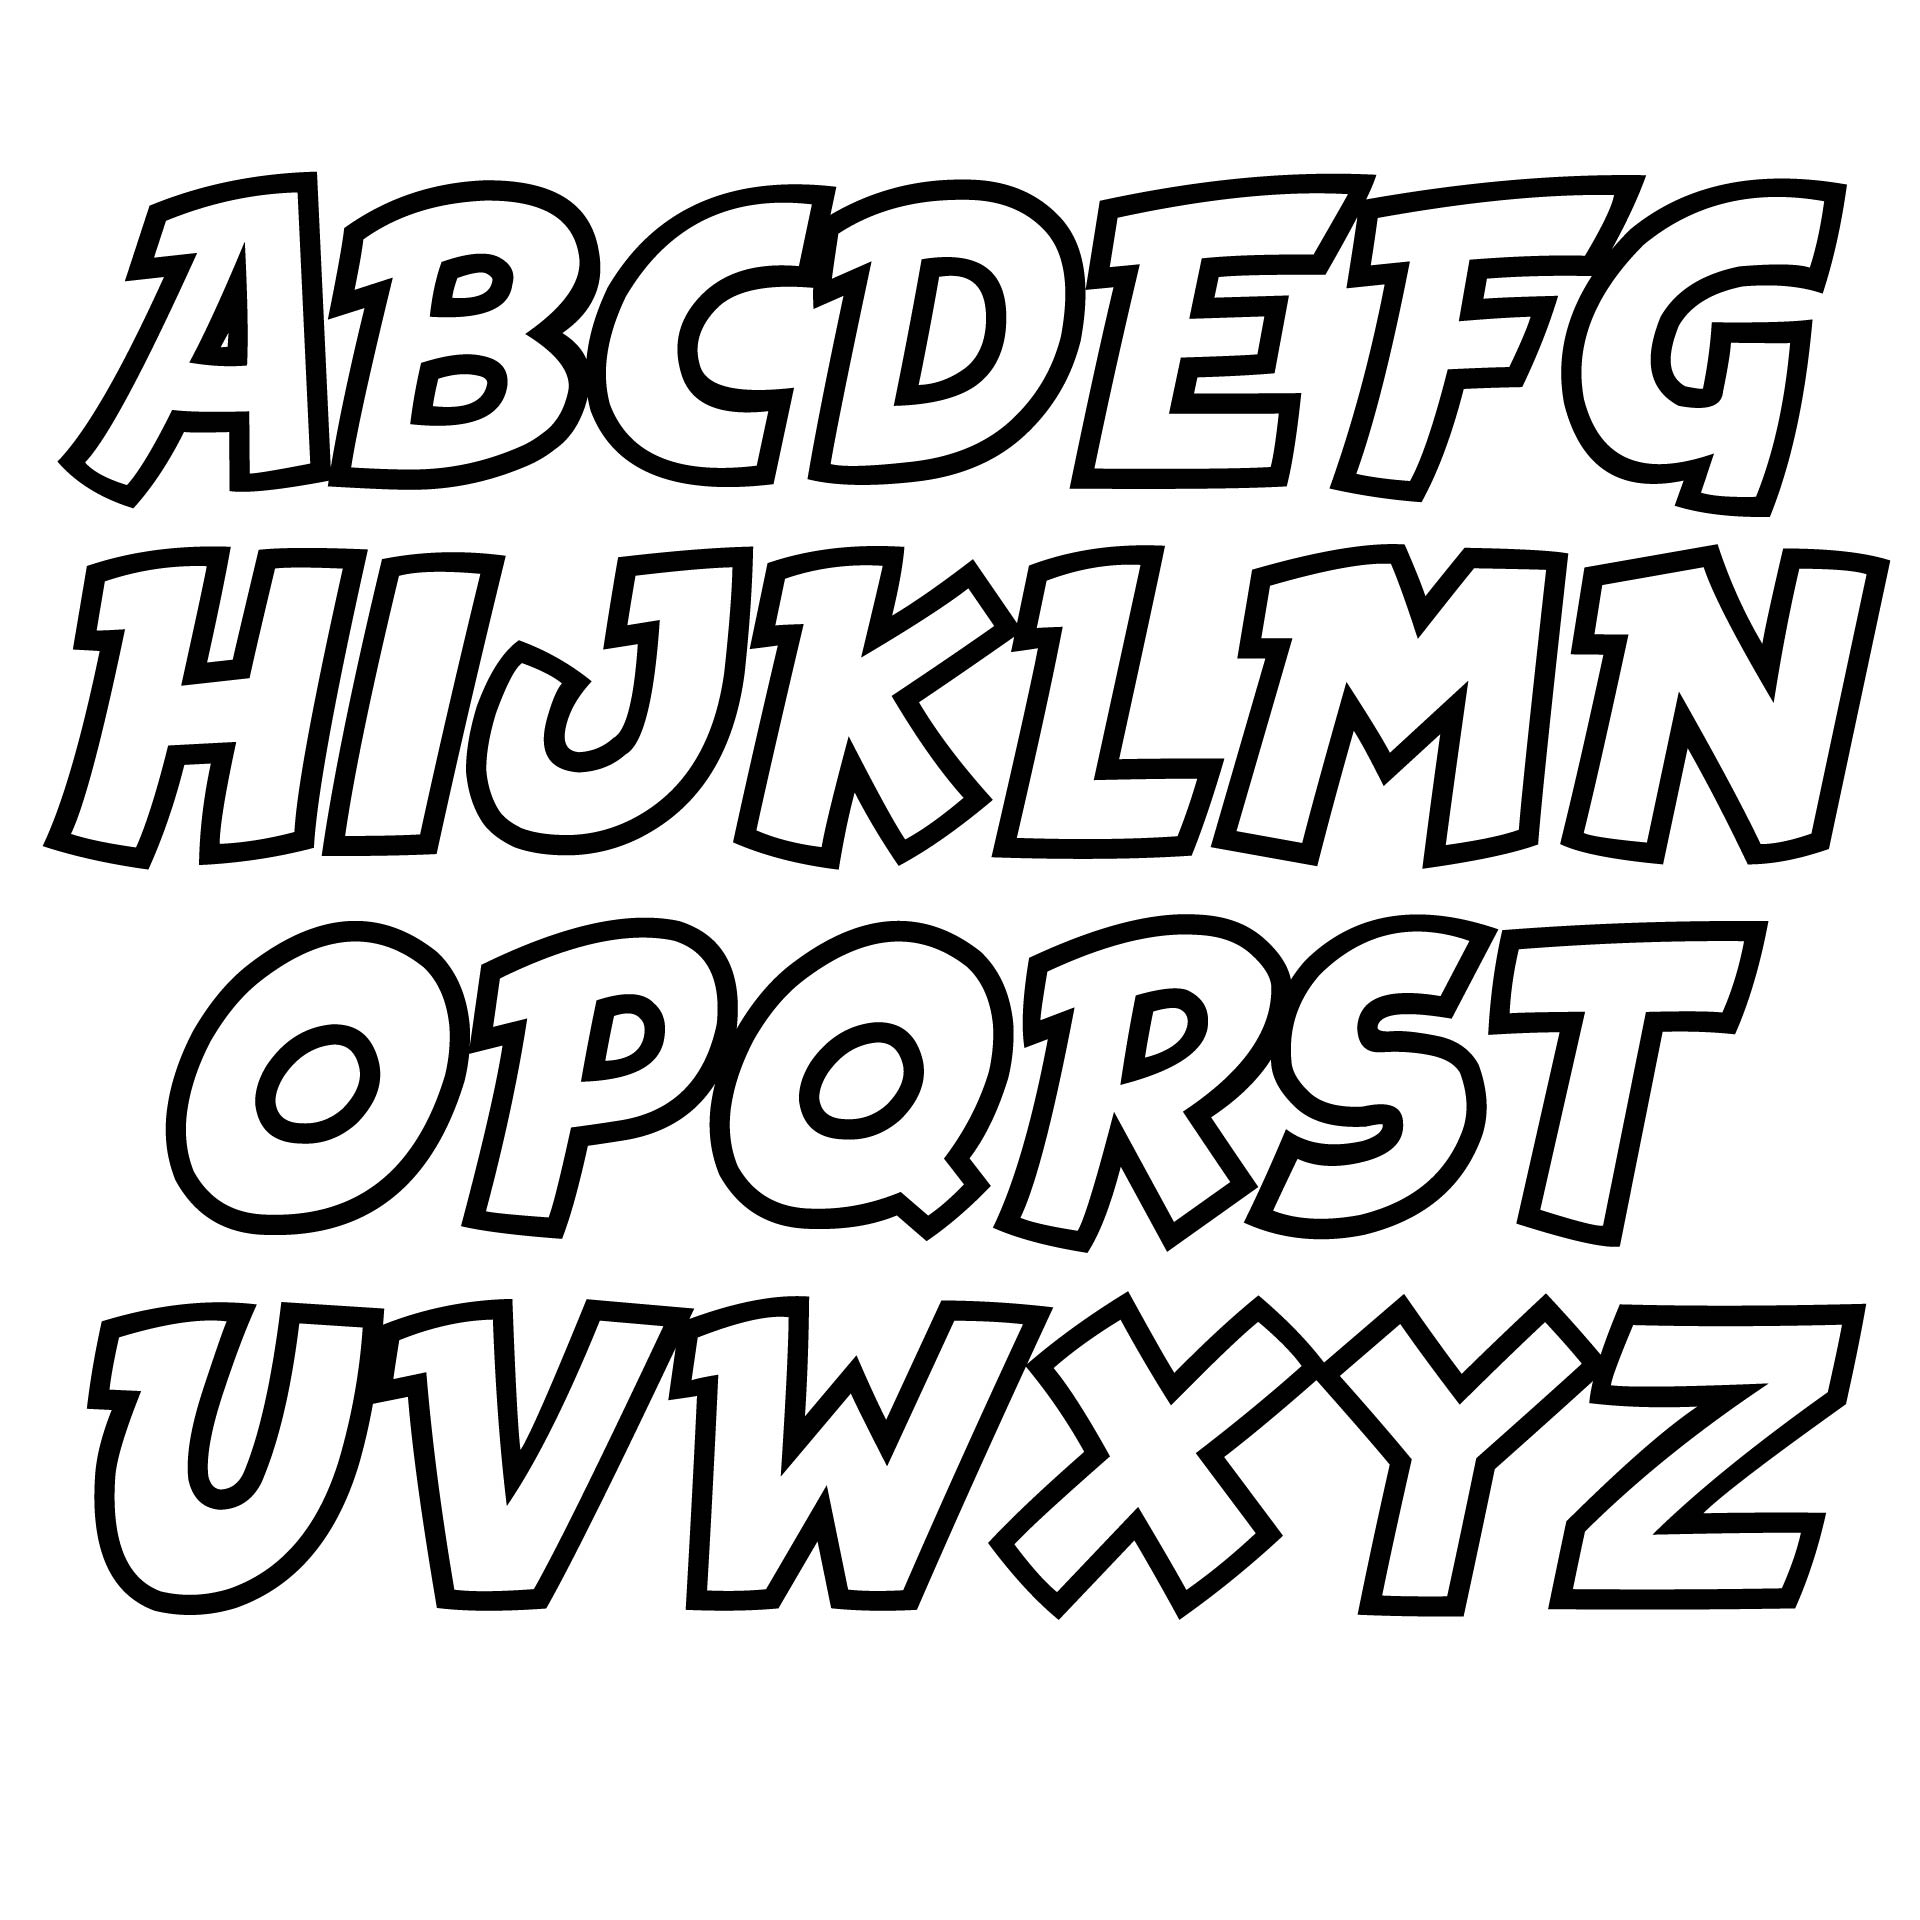 old english block letter fonts